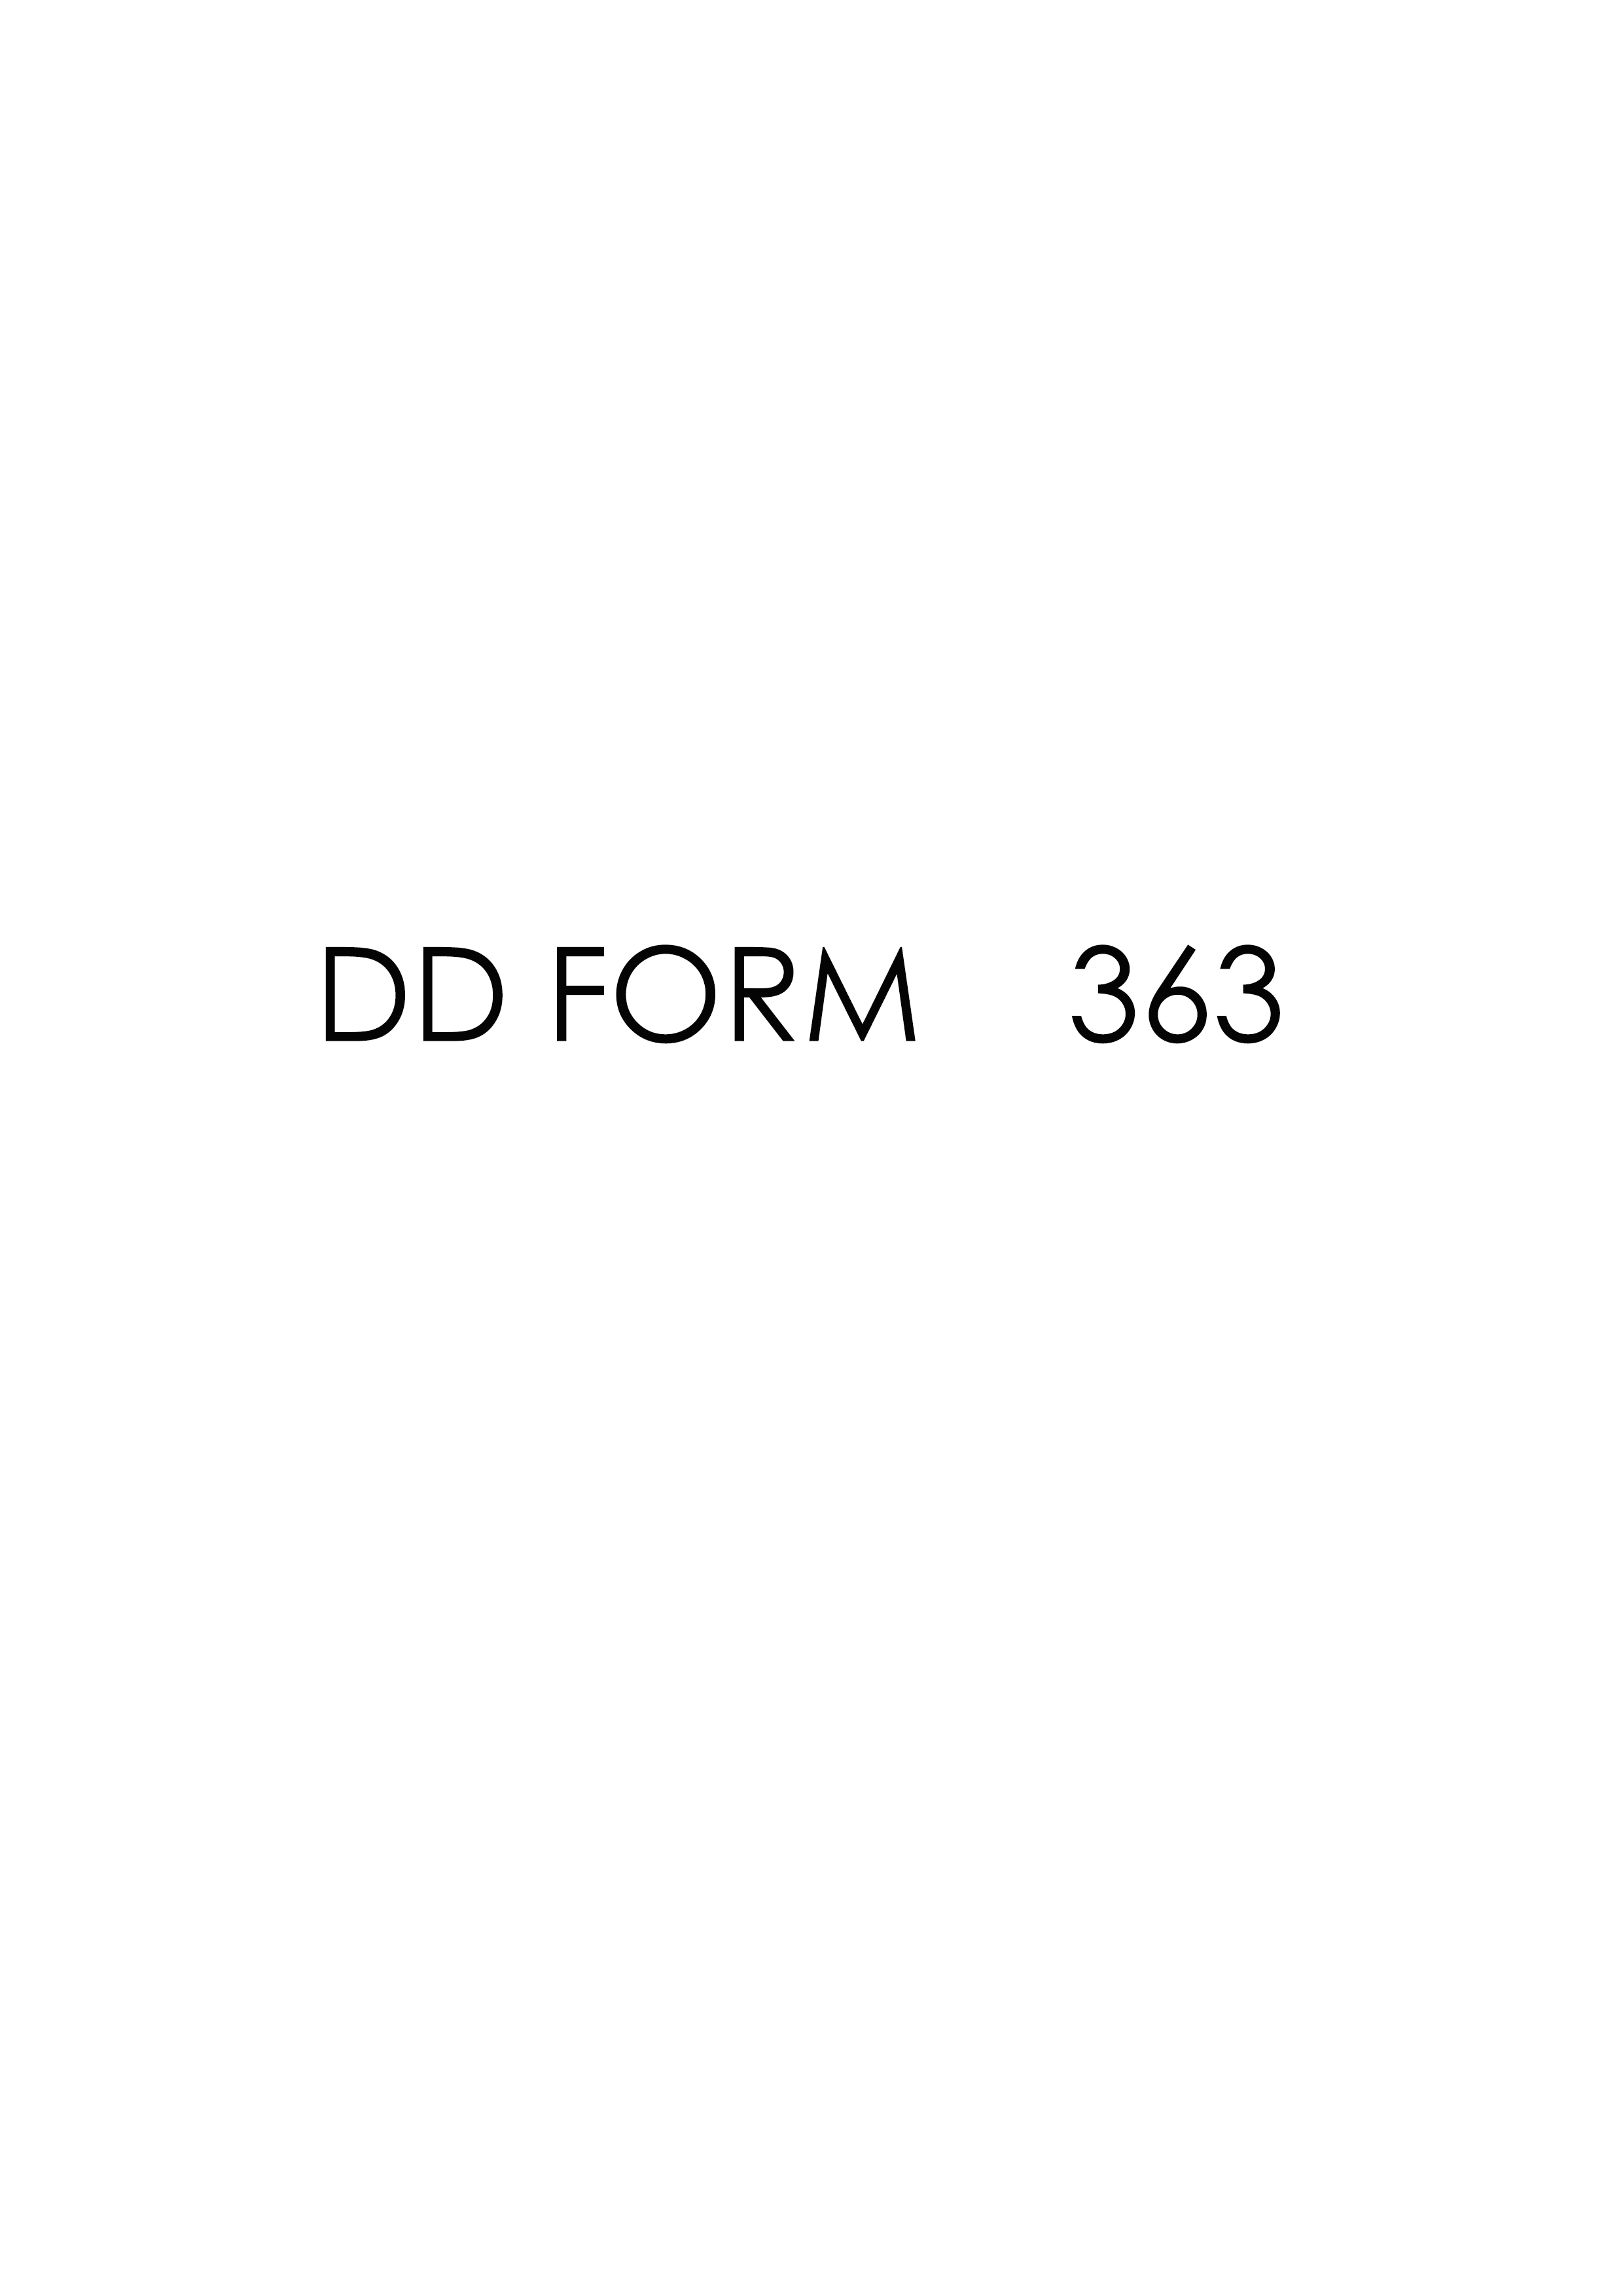 Download Fillable dd Form 363